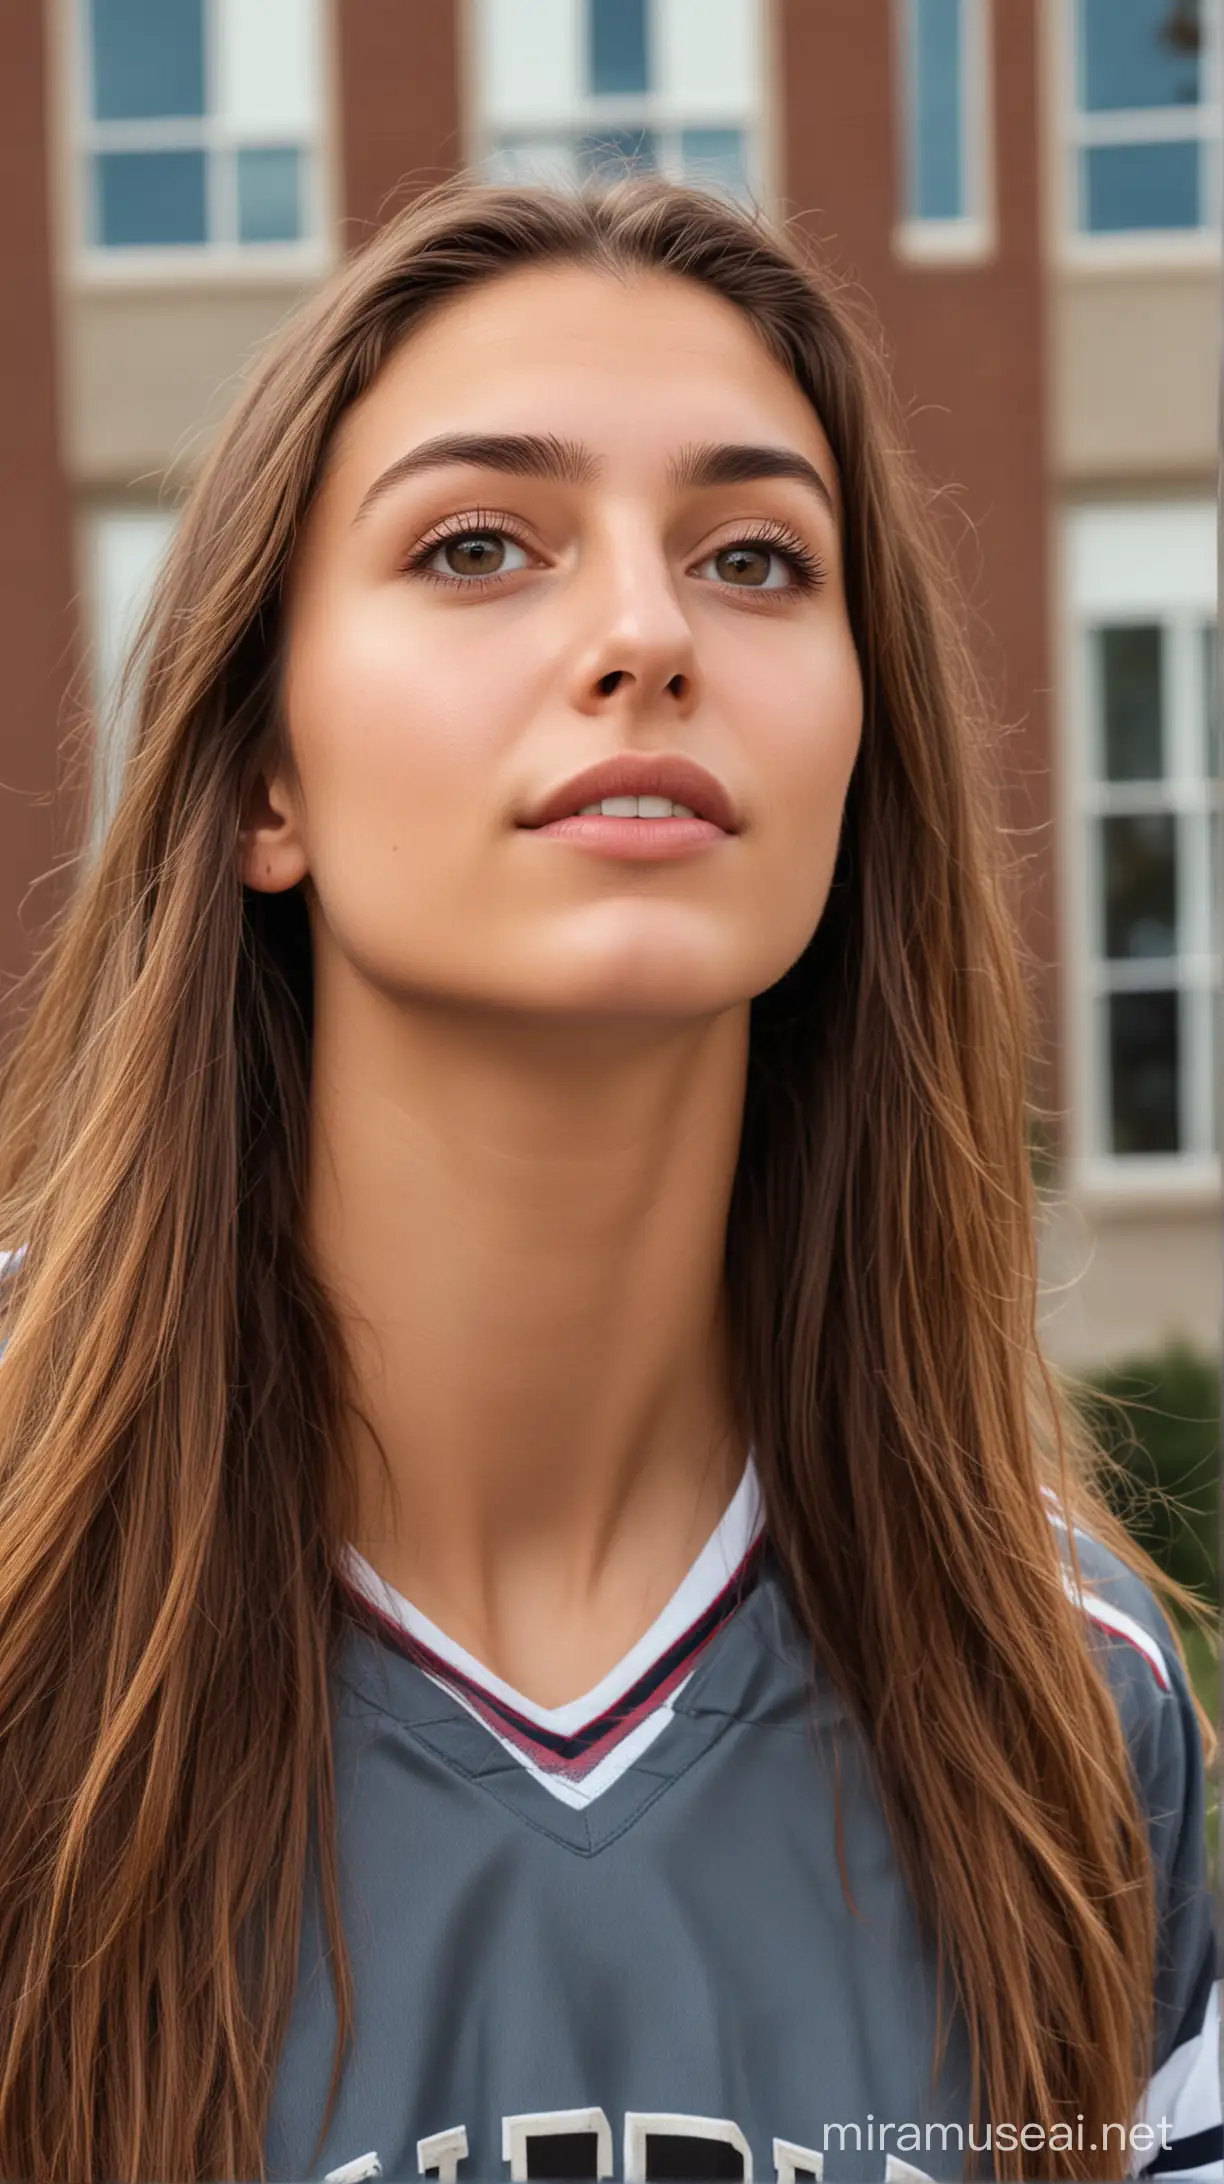 Captivating 19YearOld Woman Gazes at Handsome Man in Hockey Jersey on College Campus